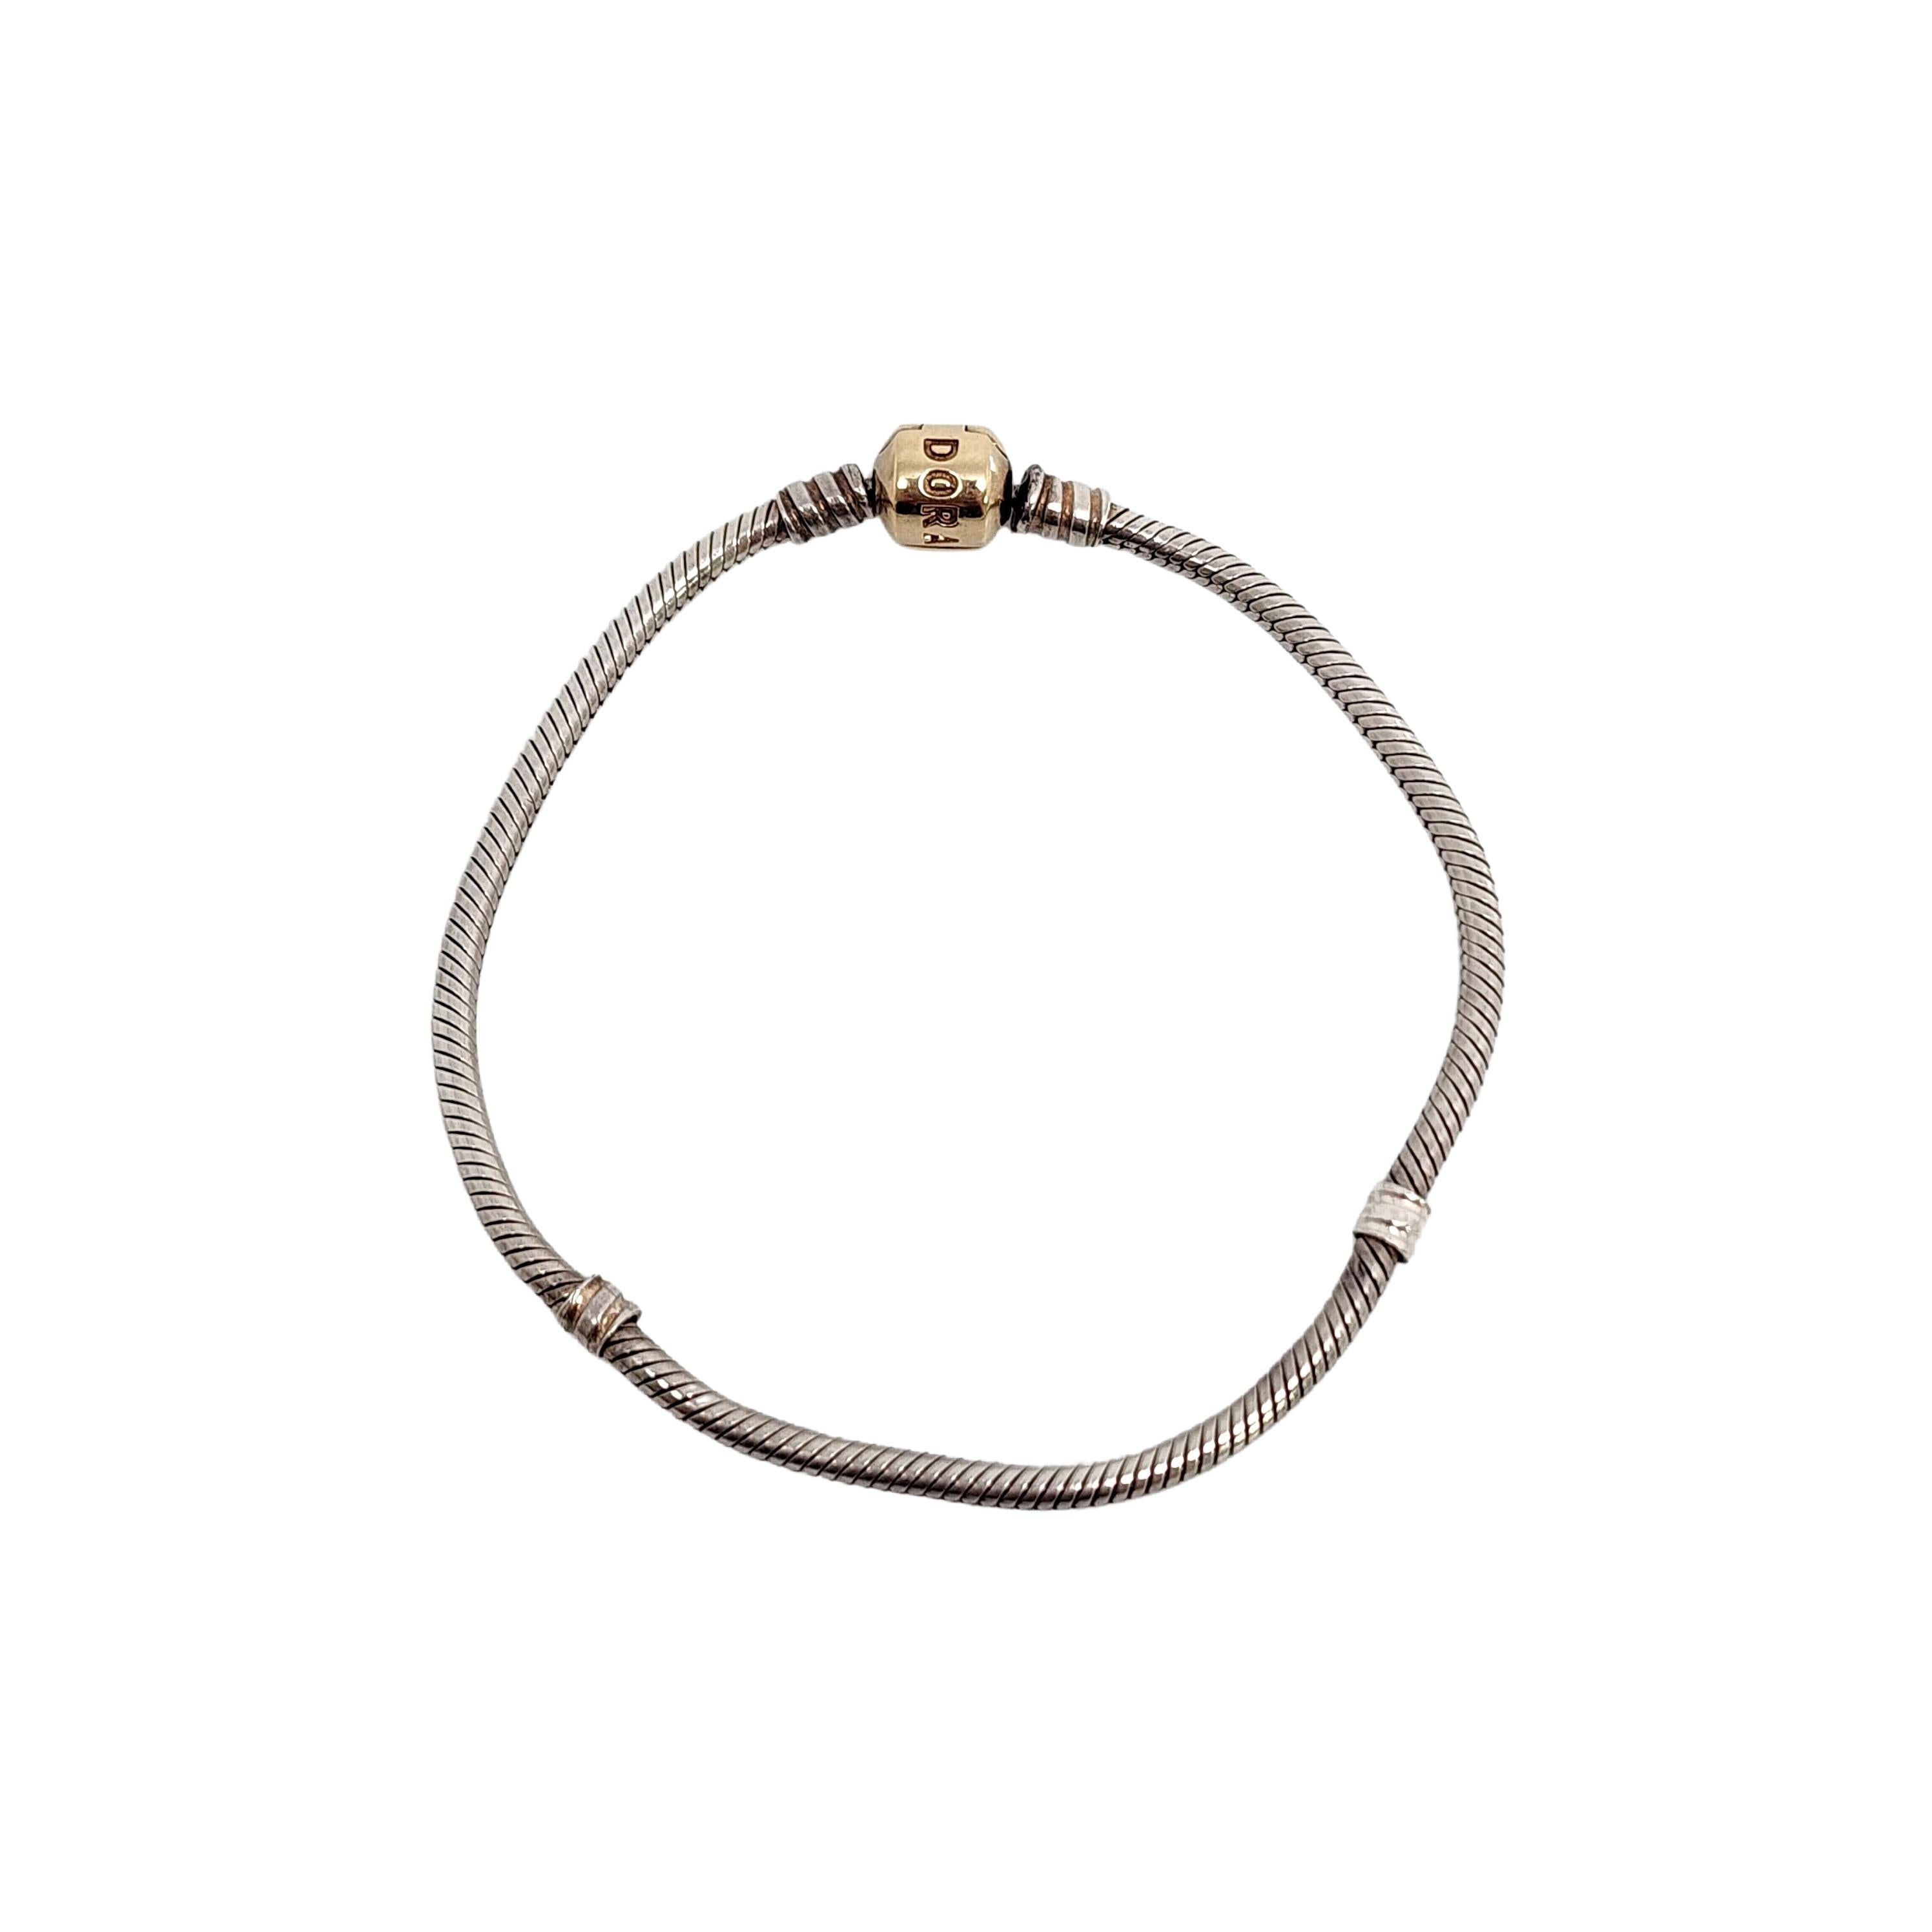 Authentic Pandora sterling silver snake chain bracelet with 14K yellow gold barrel clasp.

#590702HG

Pandora's classic charm bracelet features a snake chain and Pandora's iconic barrel clasp in 14K yellow gold for a beautiful two-tone